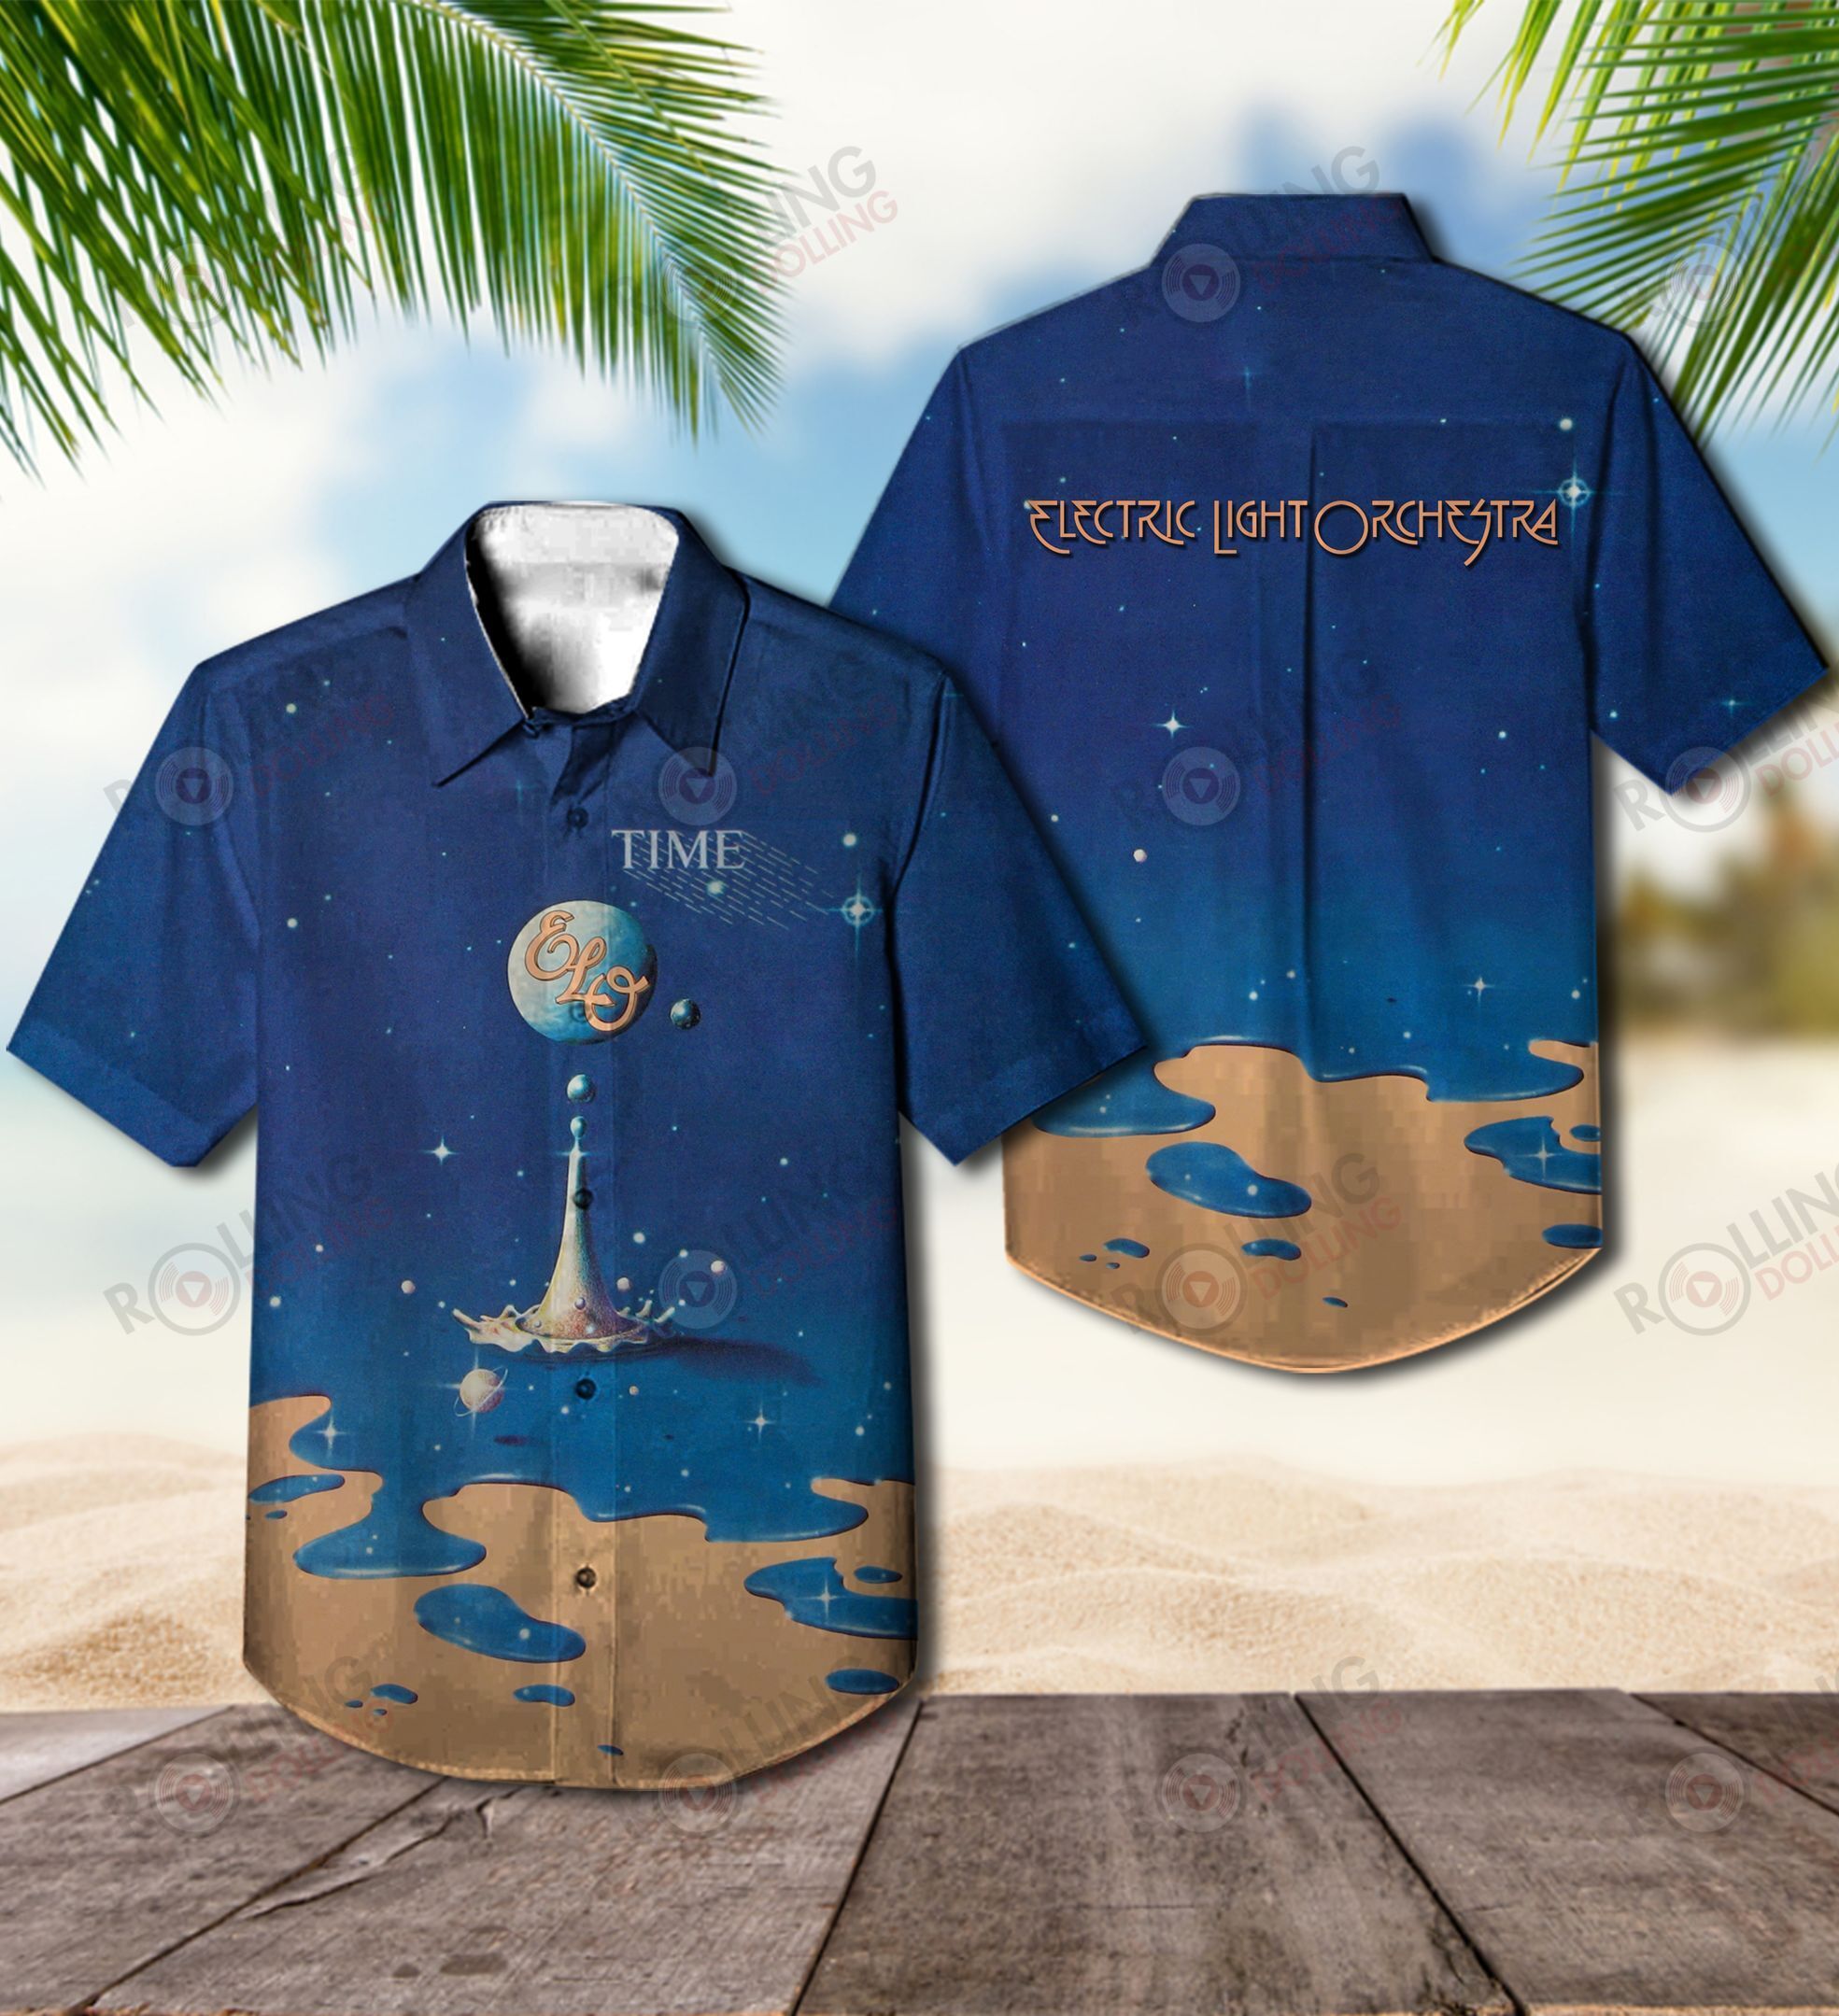 Now you can show off your love of all things band with this Hawaiian Shirt 15